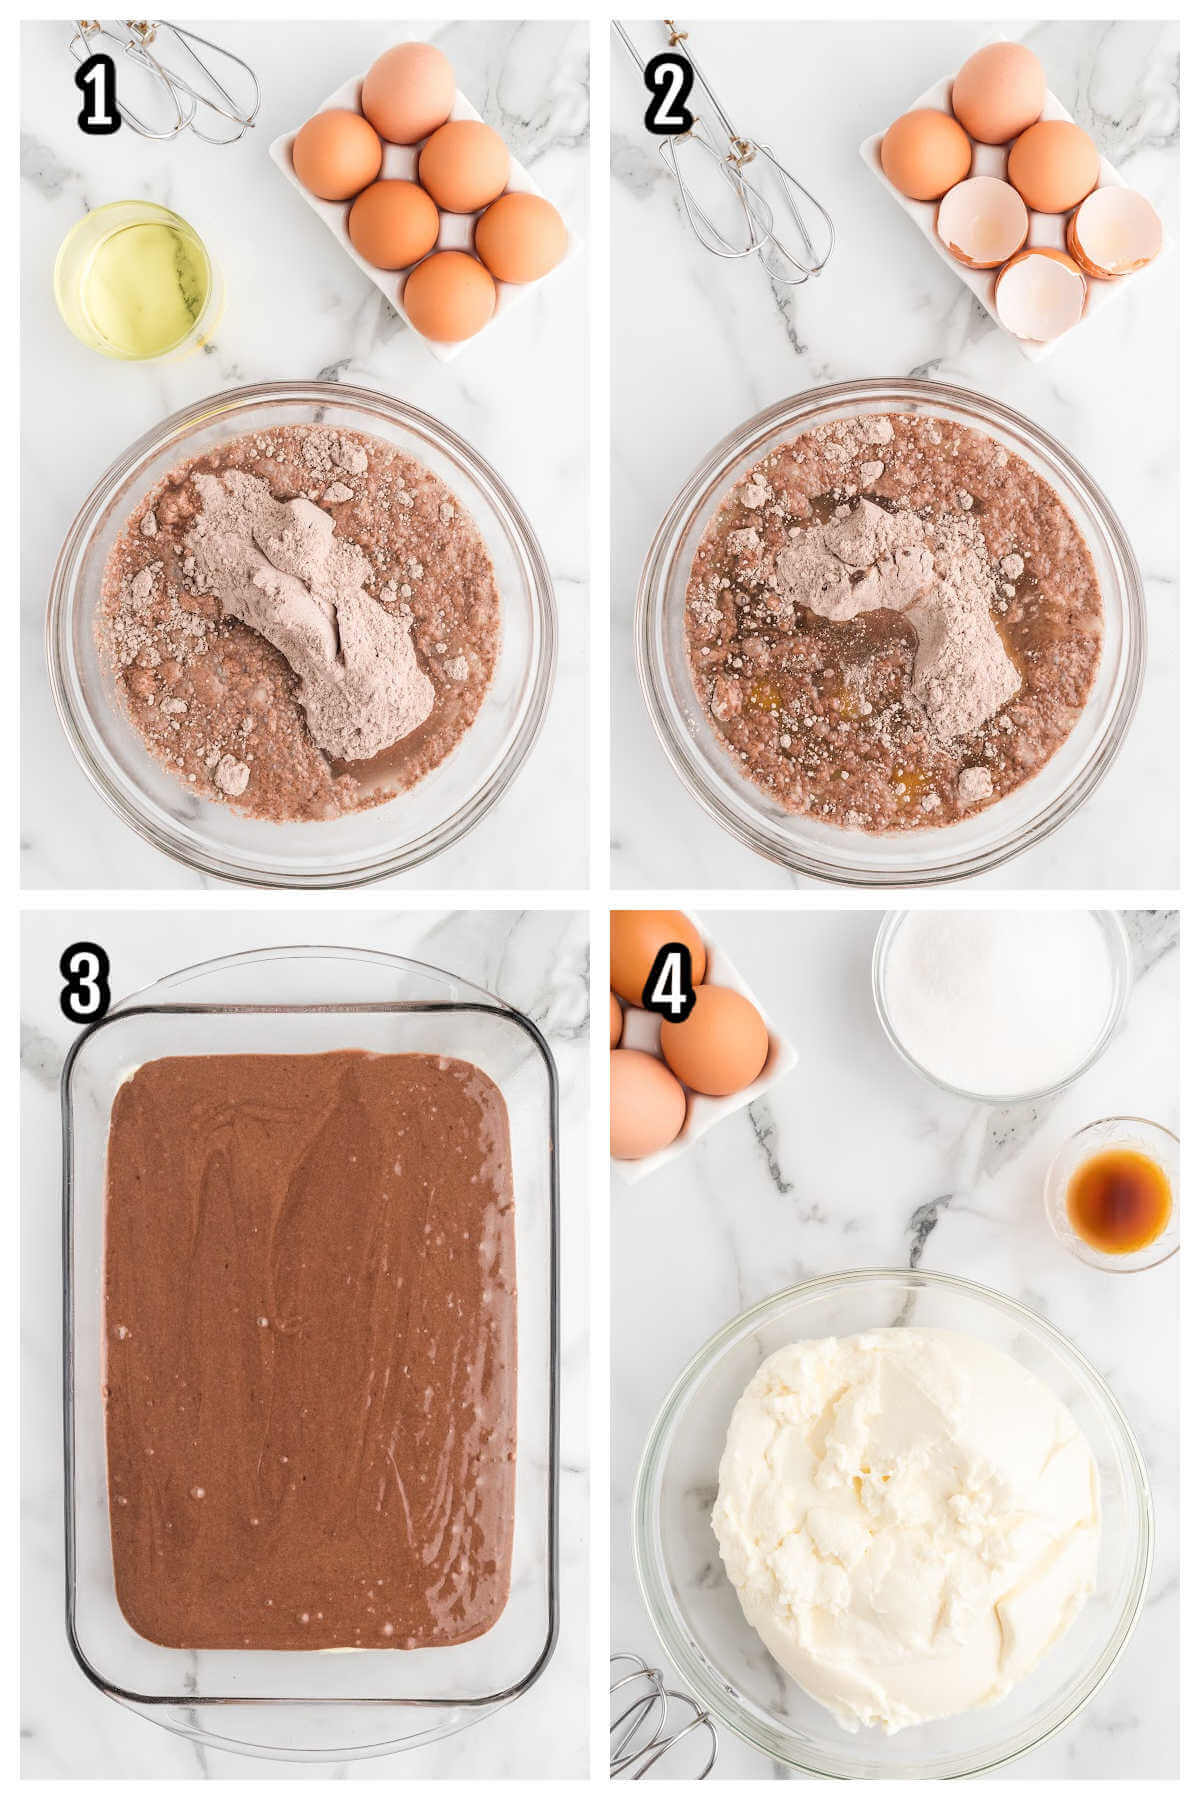 First set of four steps on making the three layer Italian Chocolate Dessert. 